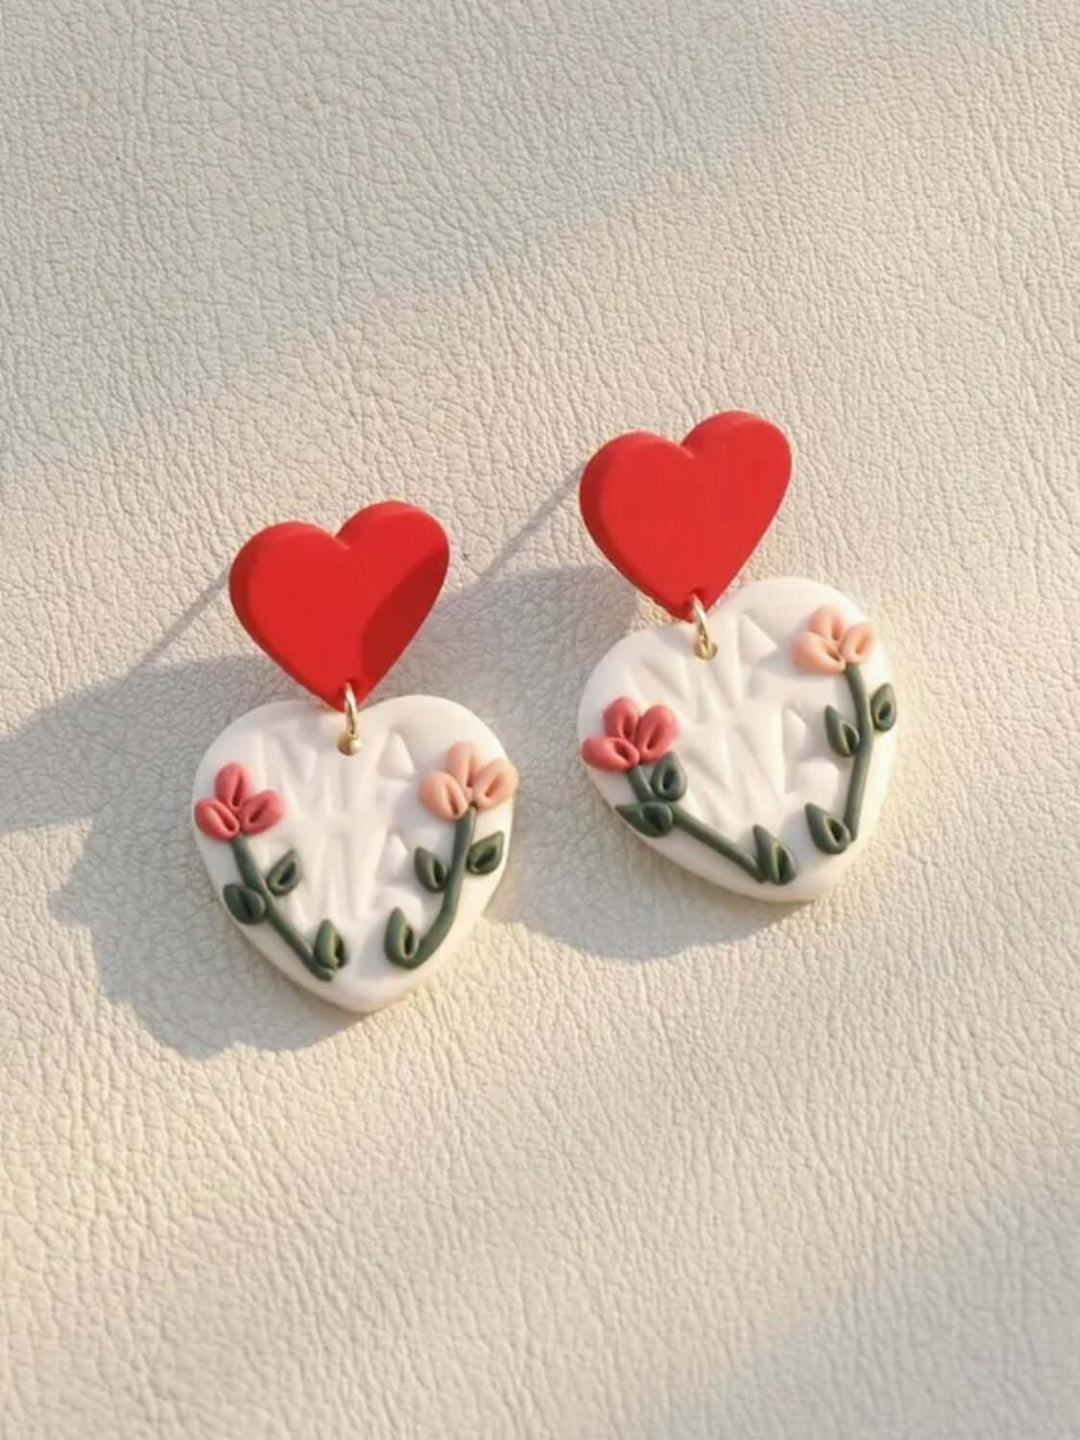 Mama Heart and Floral Earrings - Lolo Viv Boutique